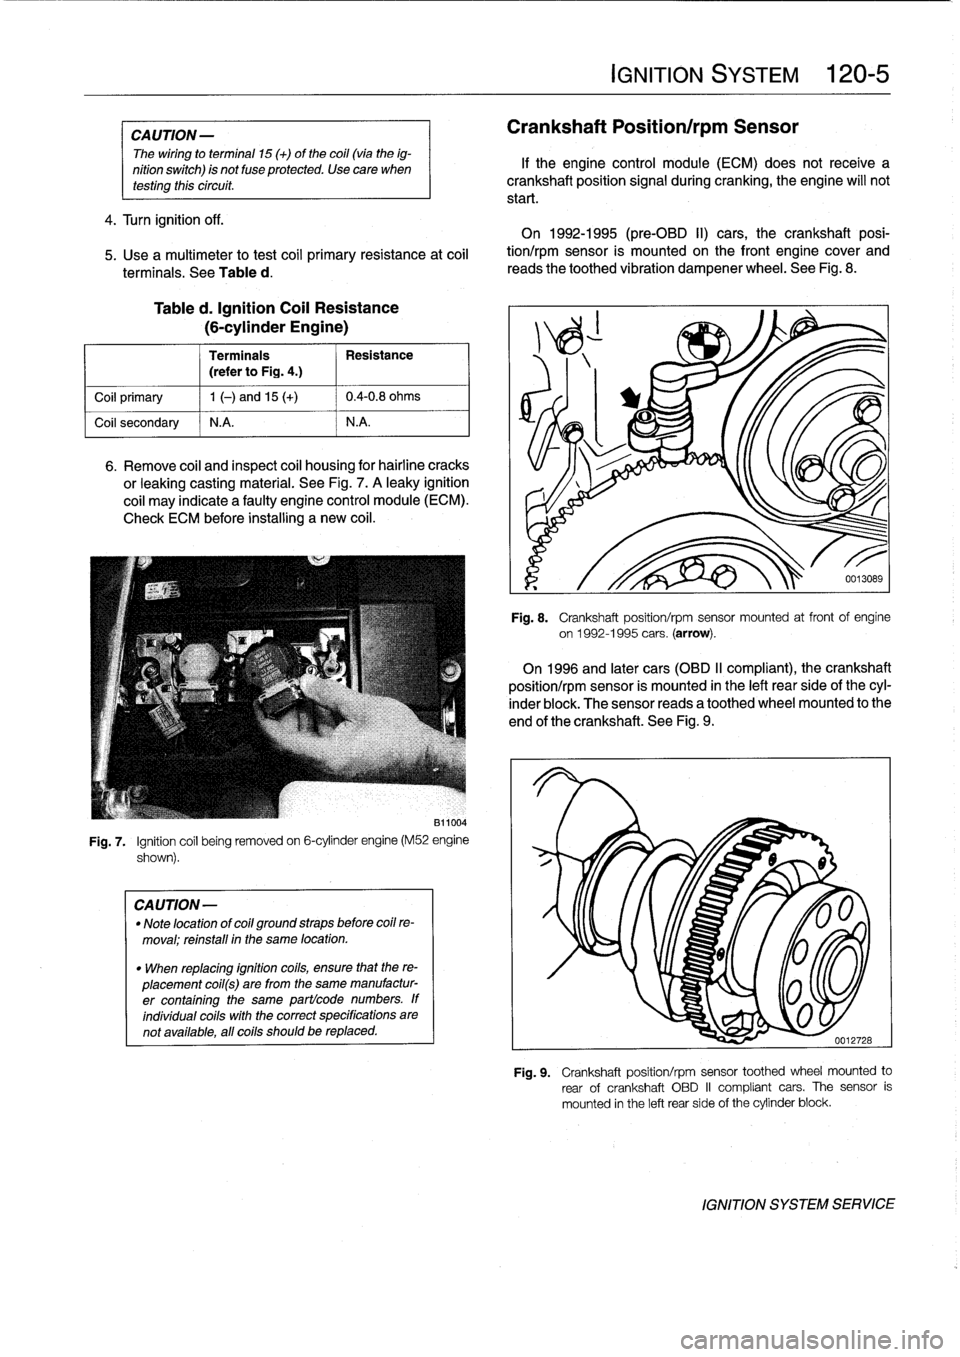 BMW 323i 1998 E36 Workshop Manual 
CAUTION
-

The
wiring
to
termina¡
15
(+)
of
the
coil(vía
the
ig-

nition
switch)
is
not
fuse
protected
.
Use
care
when
testíng
thiscircuit
.

4
.
Turn
ignition
off
.

5
.
Use
a
multimeter
to
test
